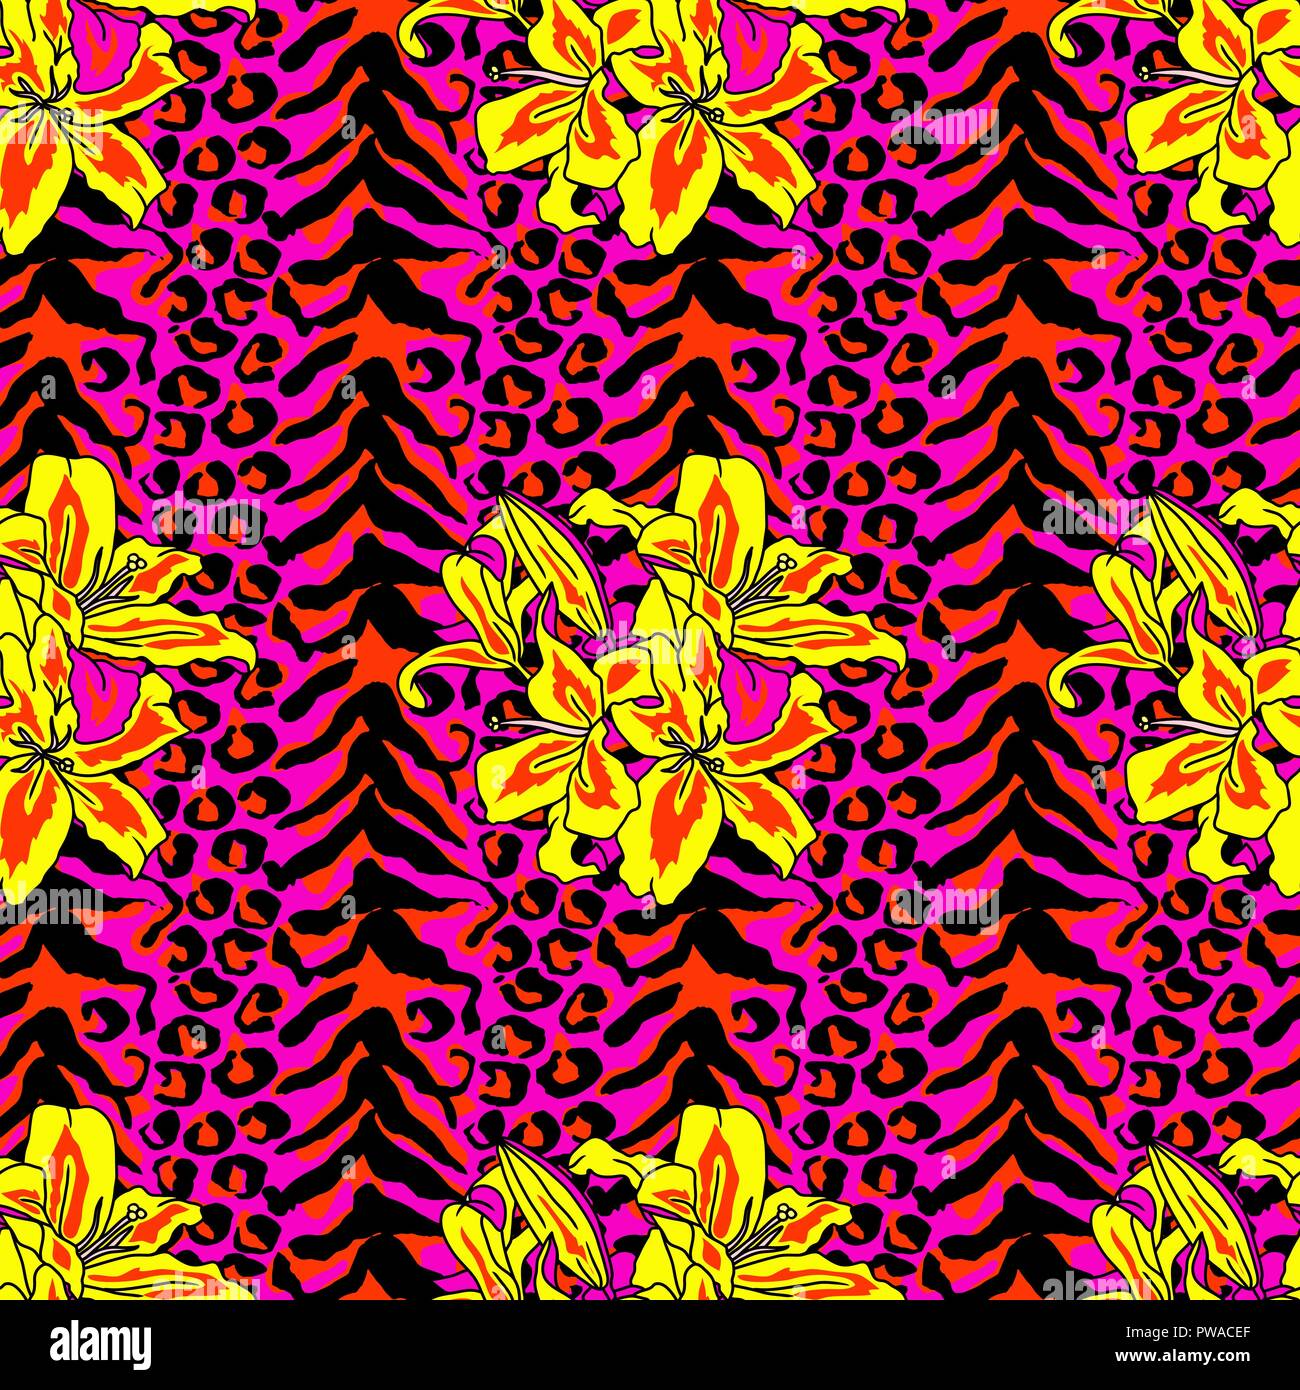 Brush painted tiger seamless pattern. Pink leopard spots and yellow lilly background. Stock Vector